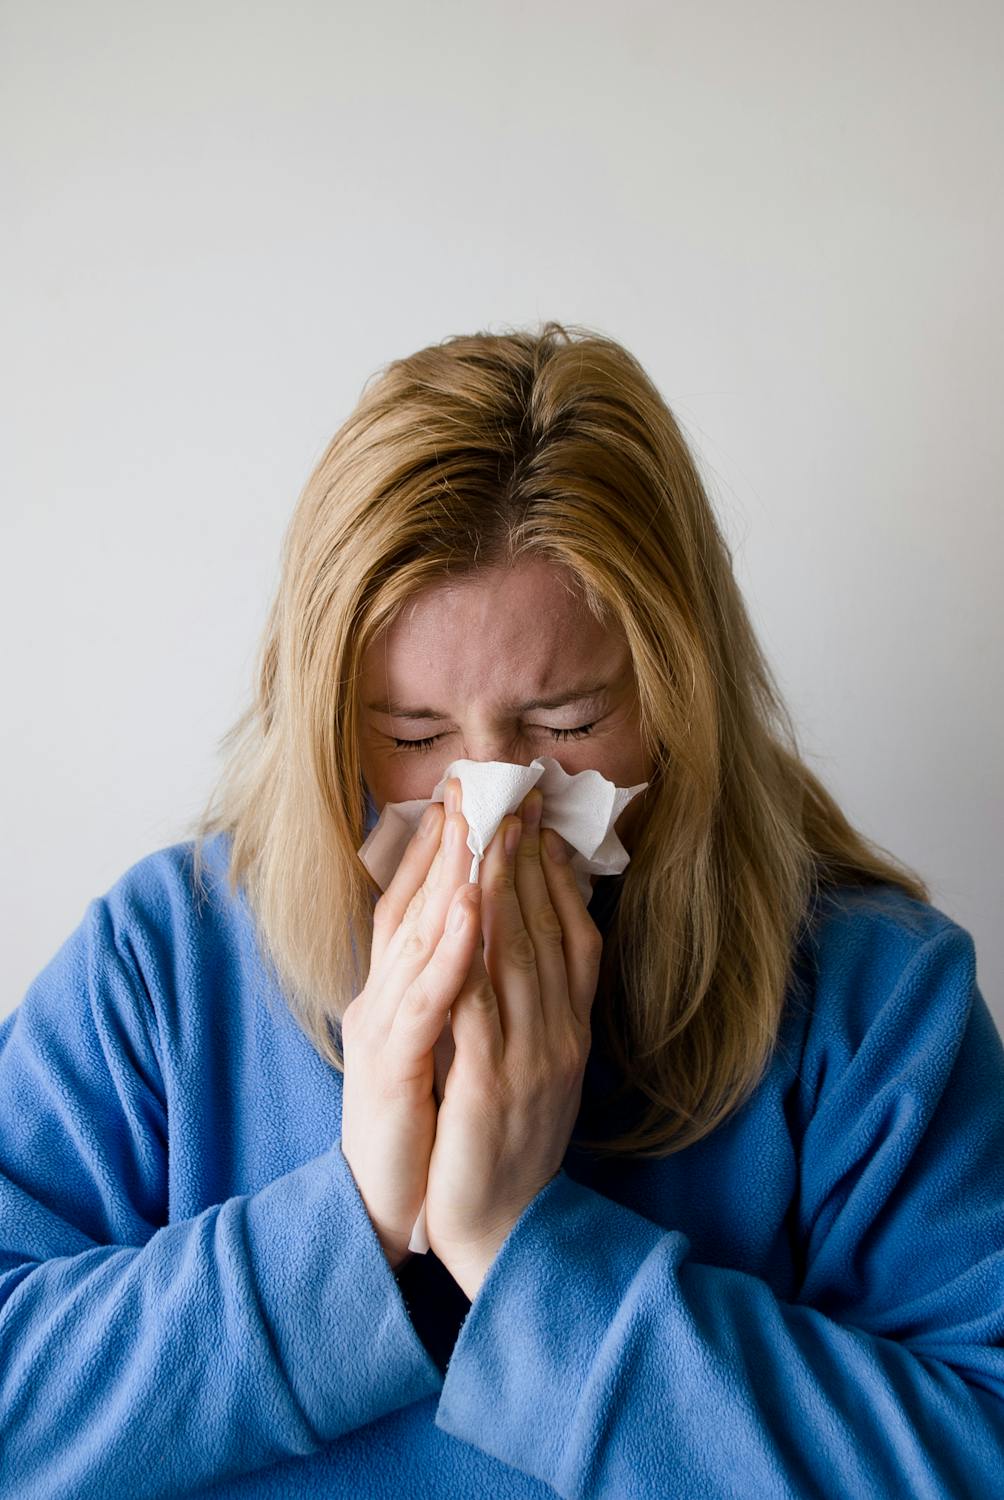 9 Illness Prevention Tips for Your Workplace